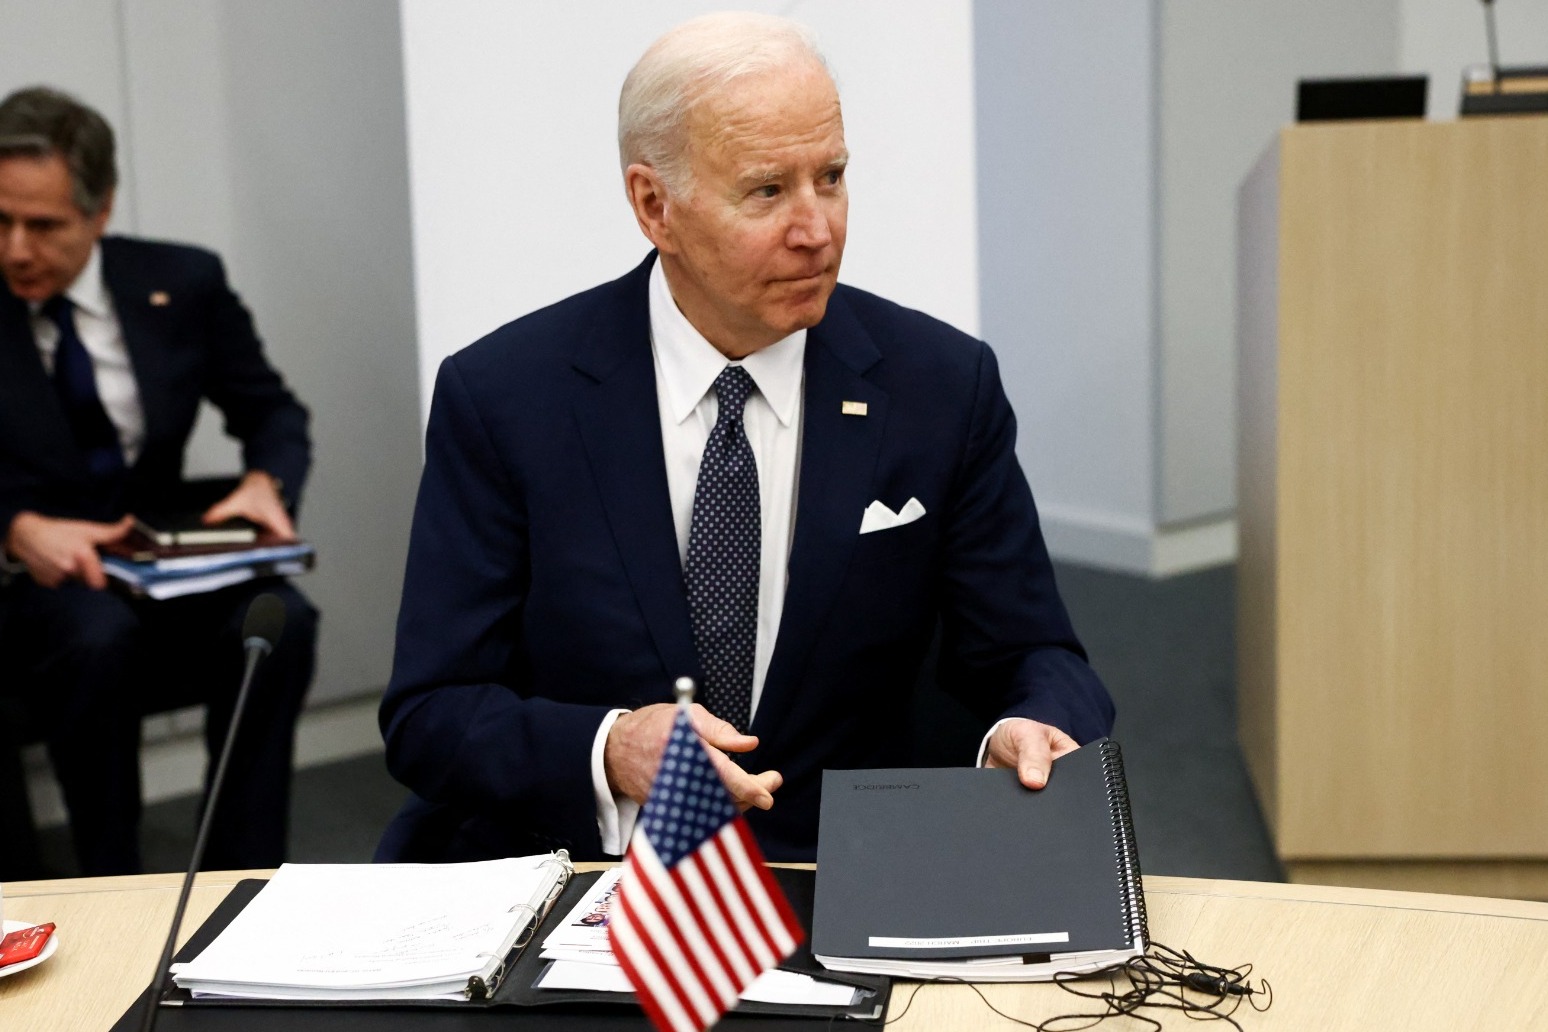 Defiant Biden says remark about Putin’s power was sparked by ‘moral outrage’ 